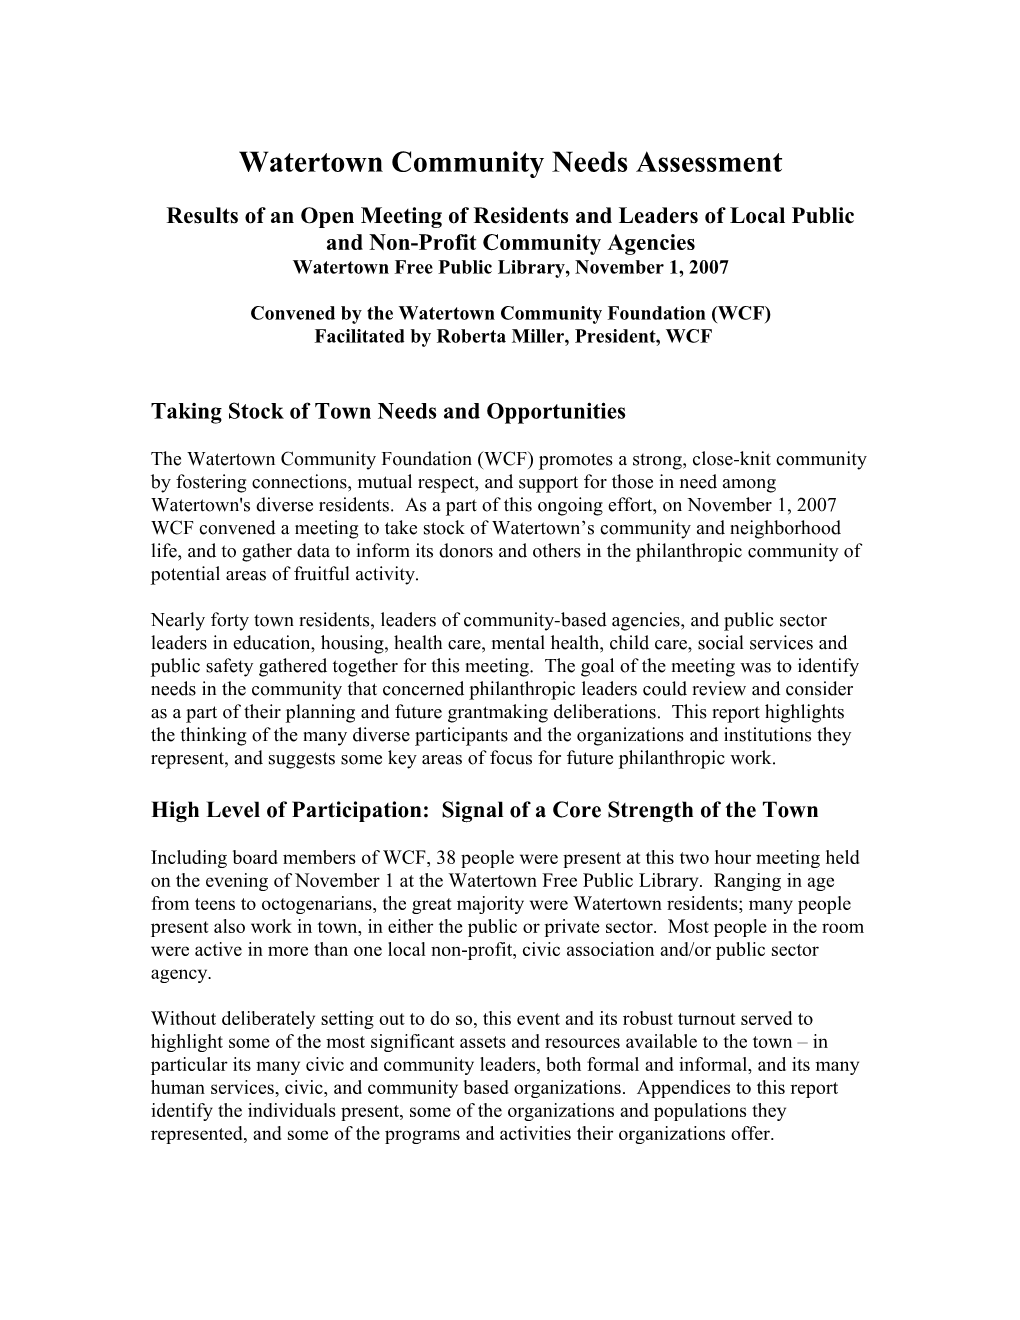 Results of an Open Meeting of Residents and Leaders of Local Public and Non-Profit Community